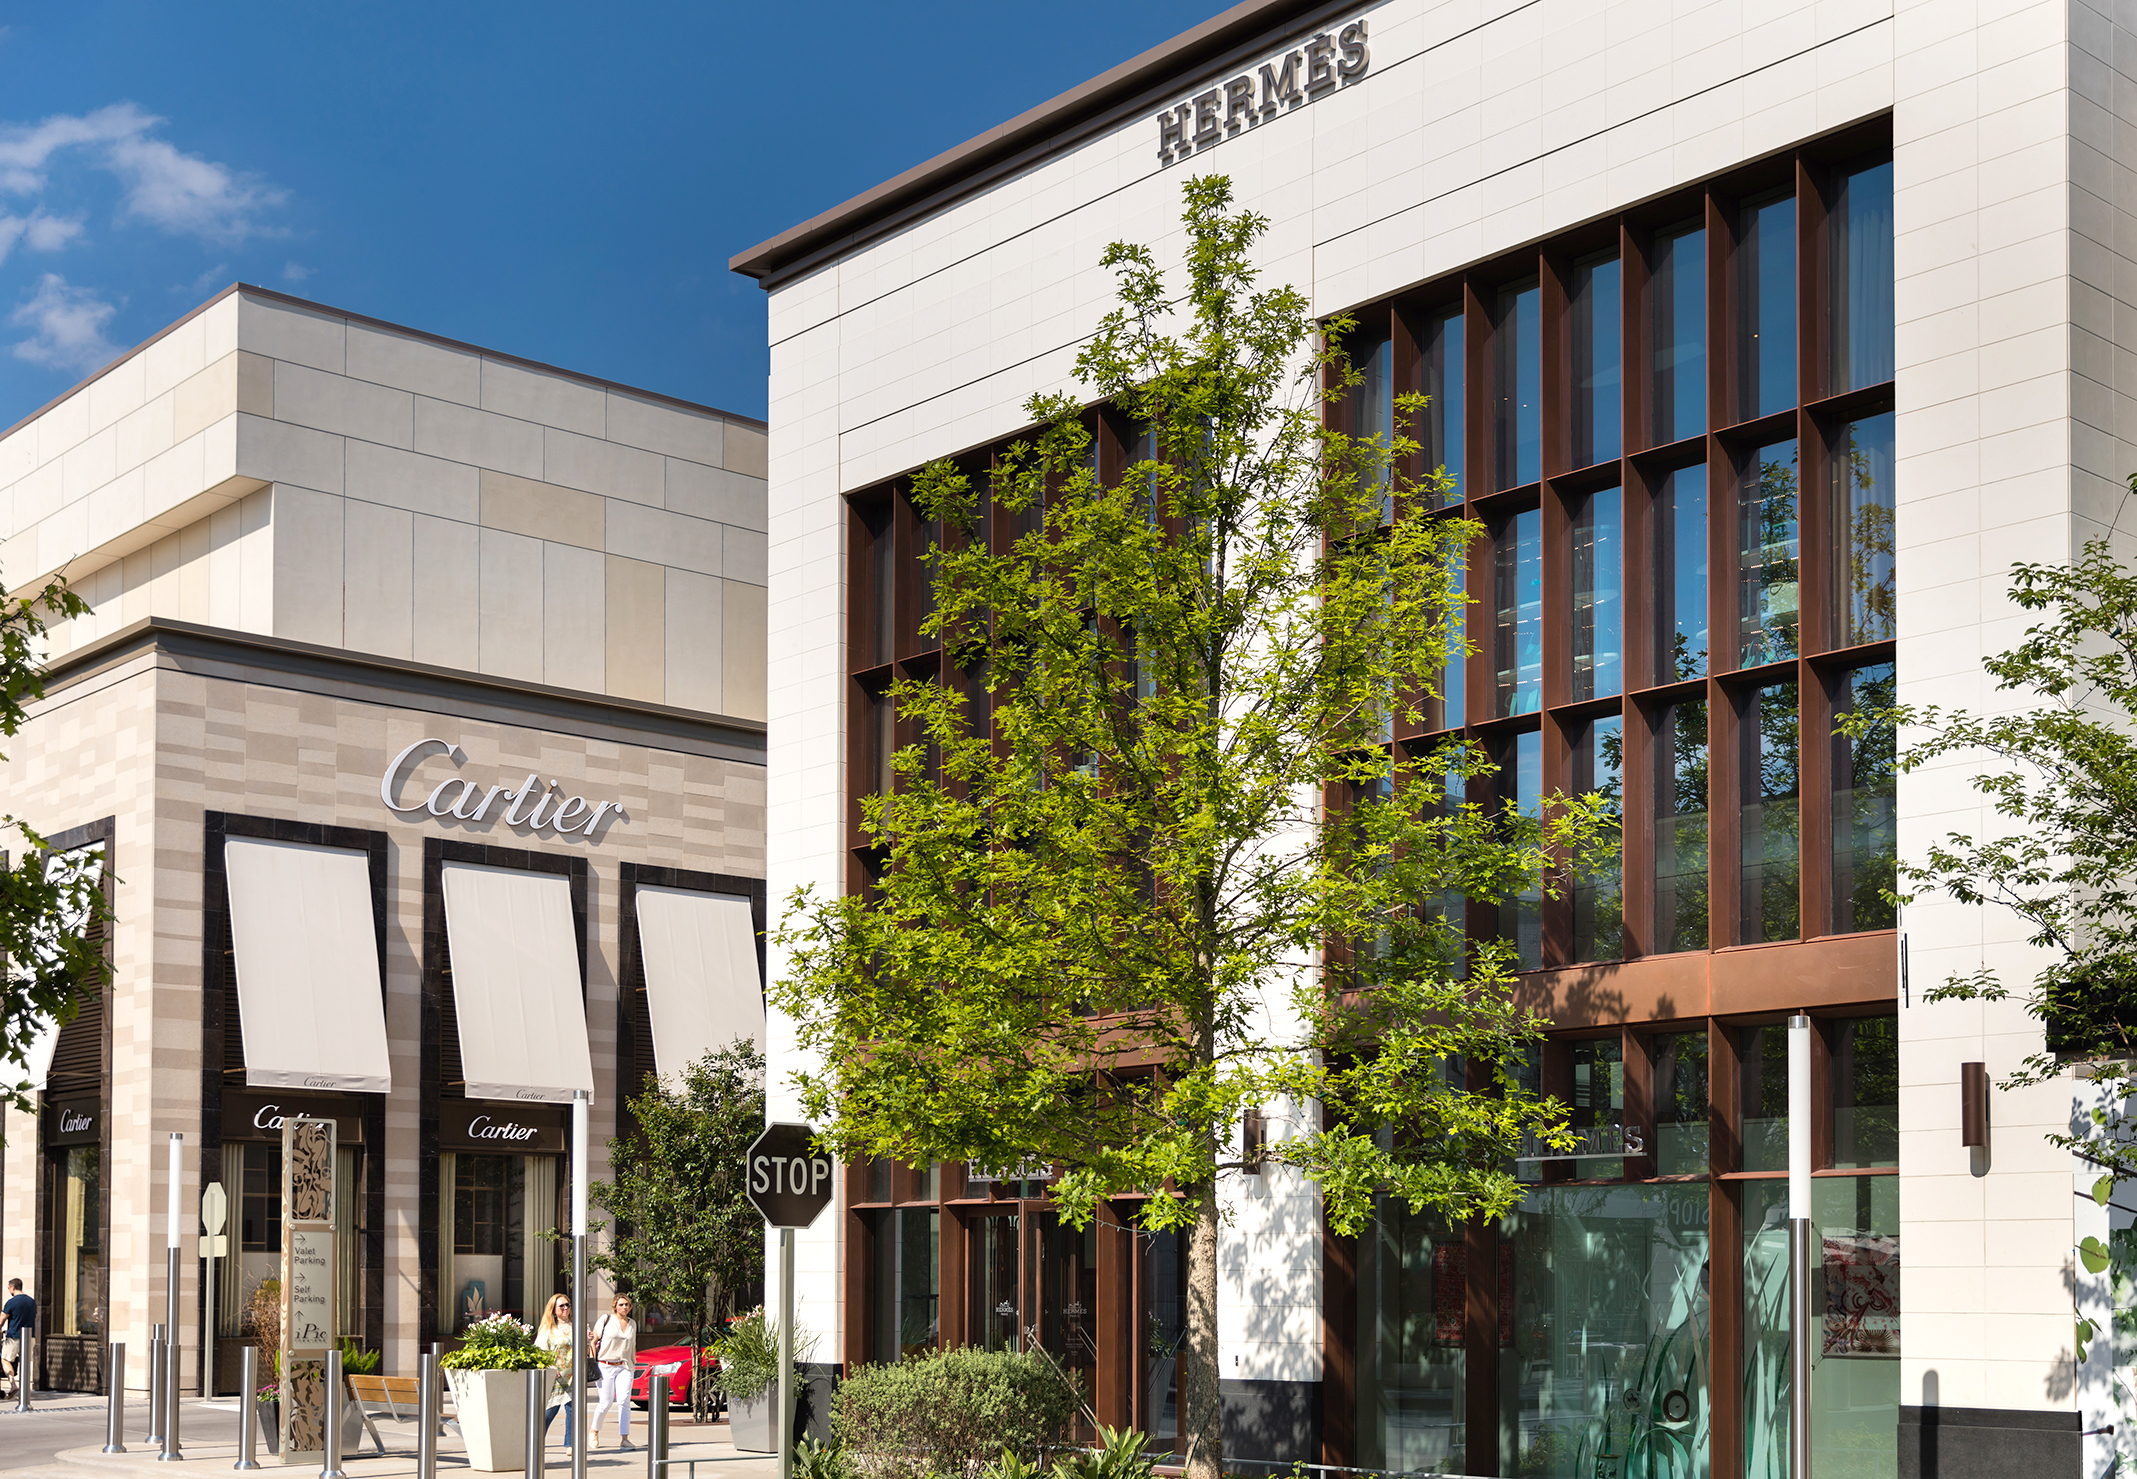 Cartier opens at River Oaks District